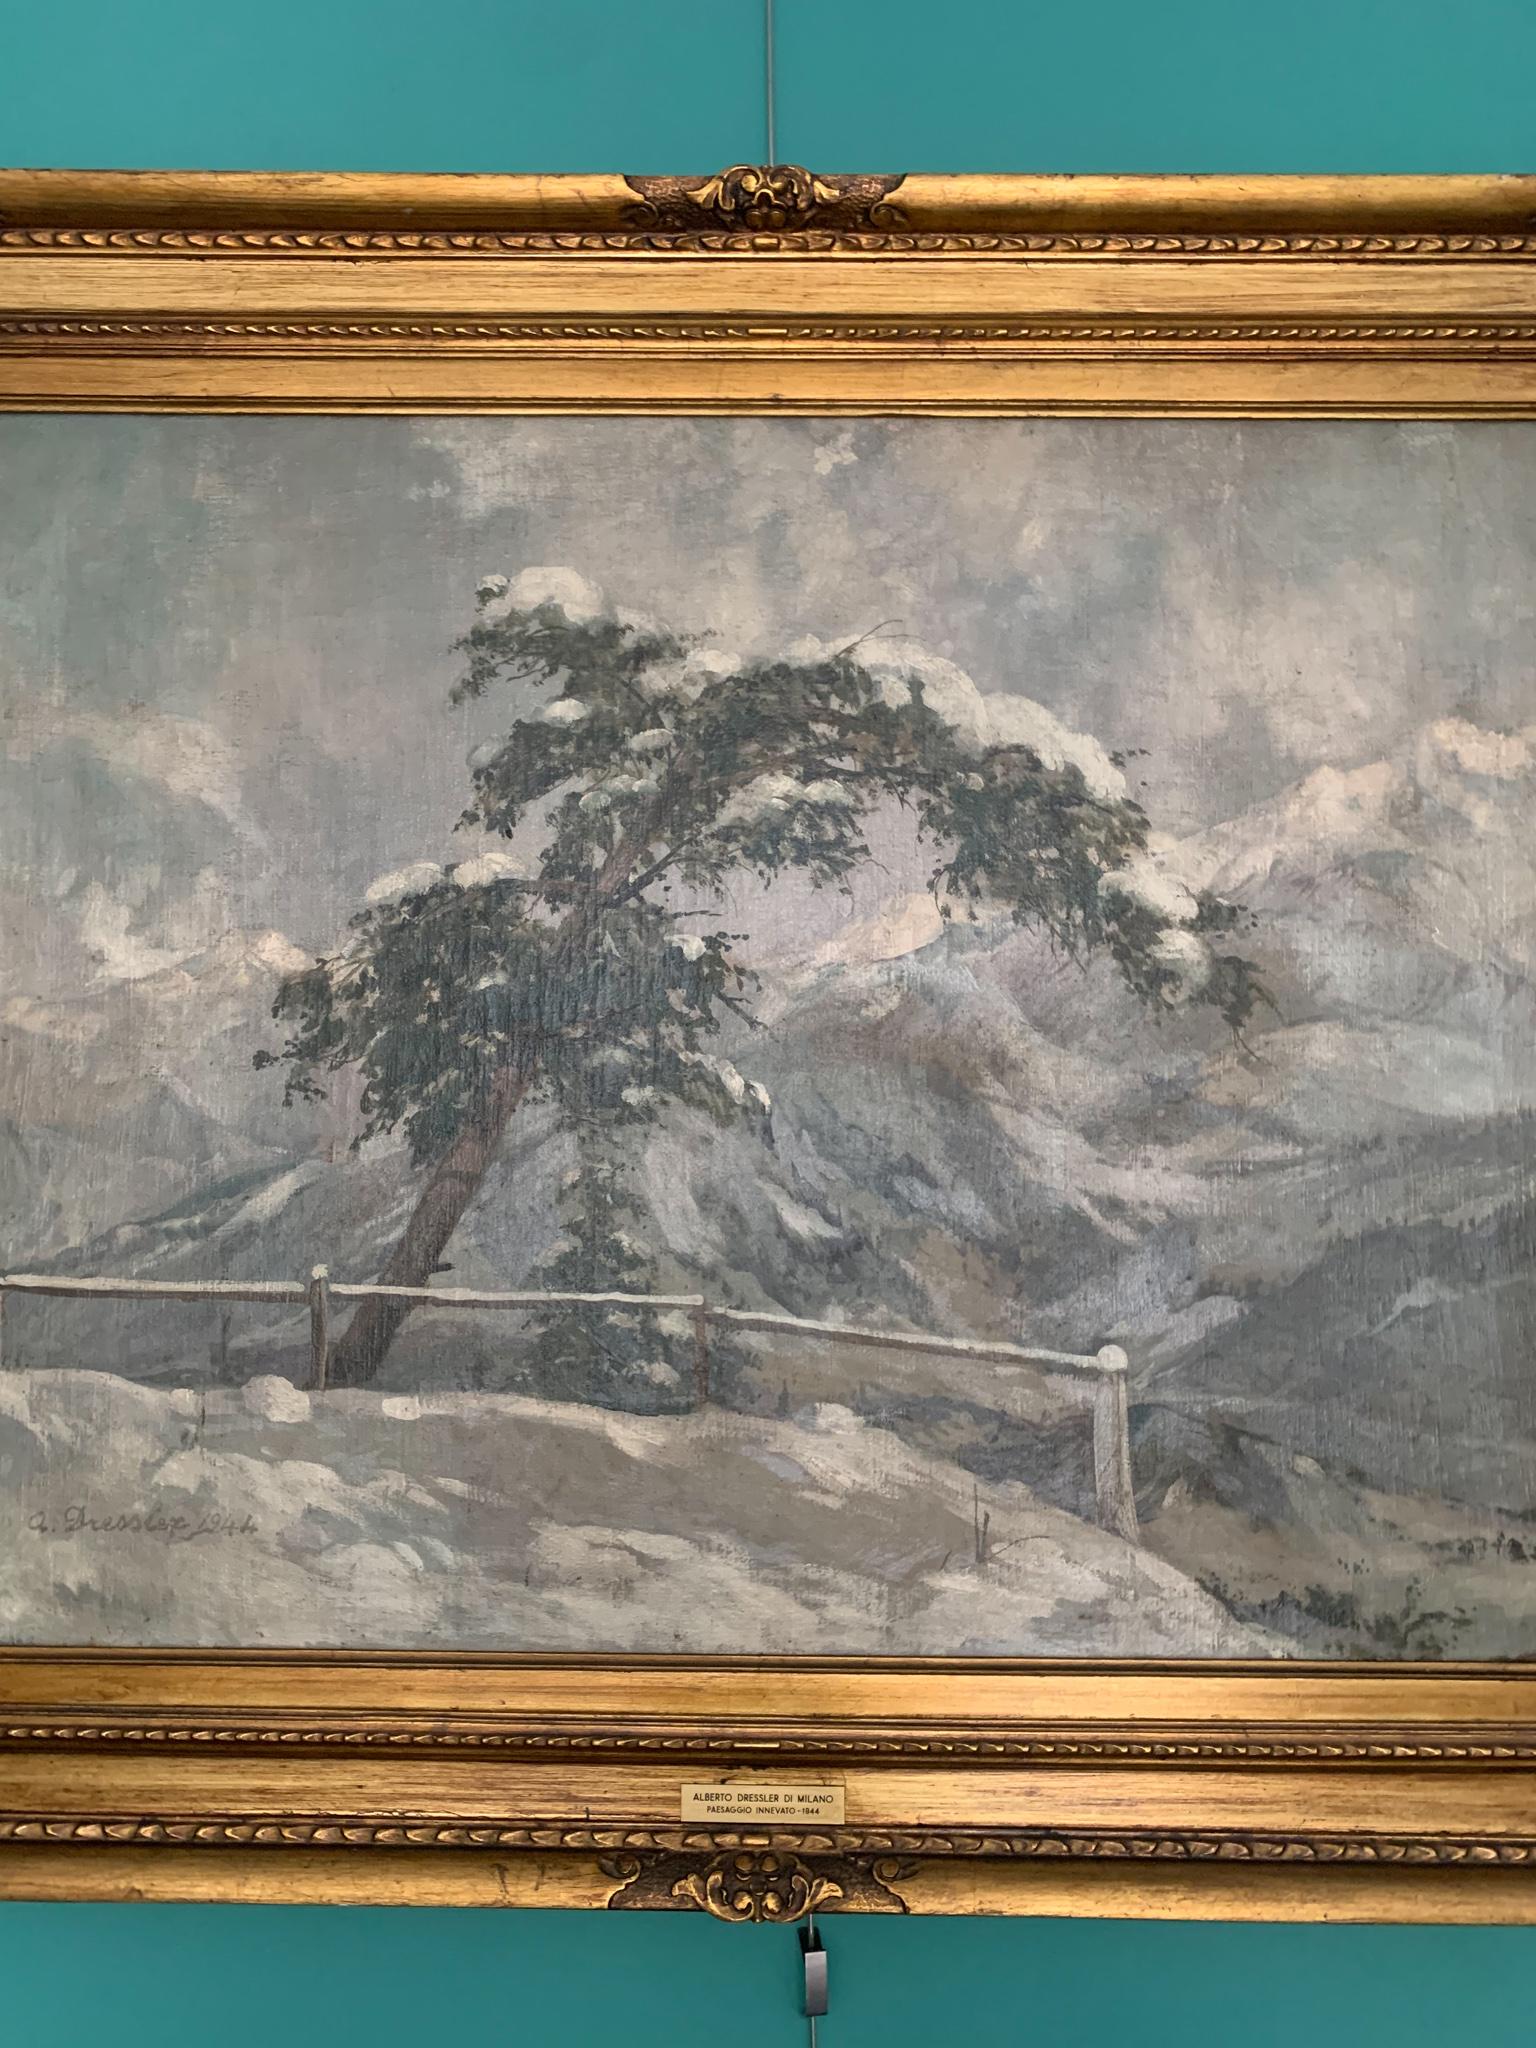 Italian Oil Painting on Canvas by Alberto Dressler 'Snowy Landscape' from 1944 For Sale 3